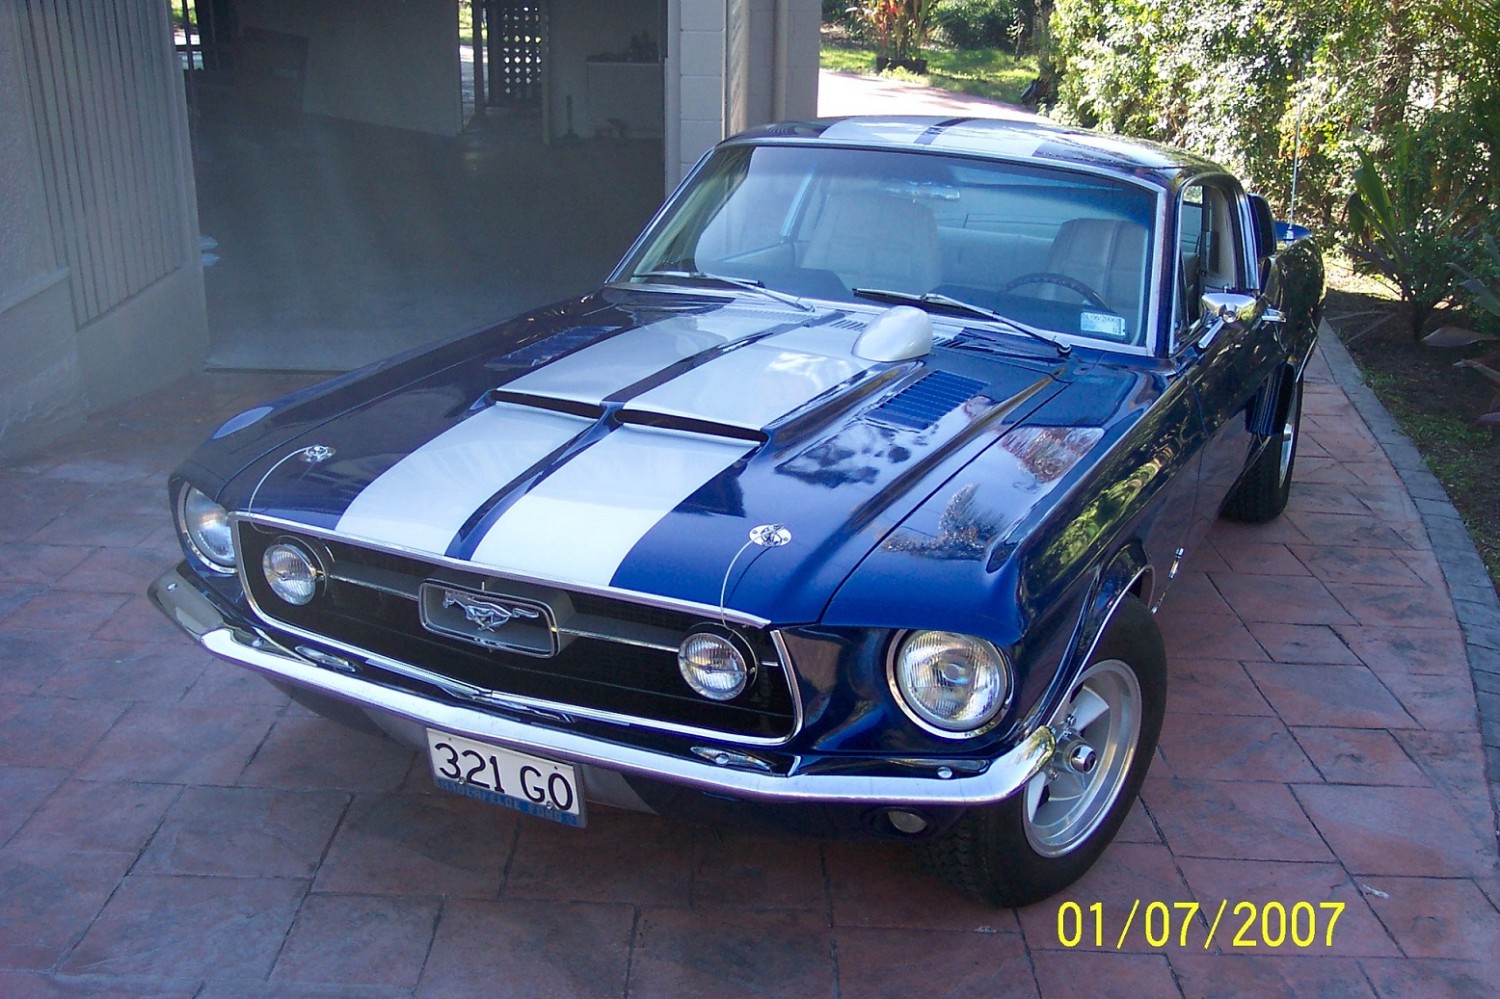 1967 Ford Mustang fastback